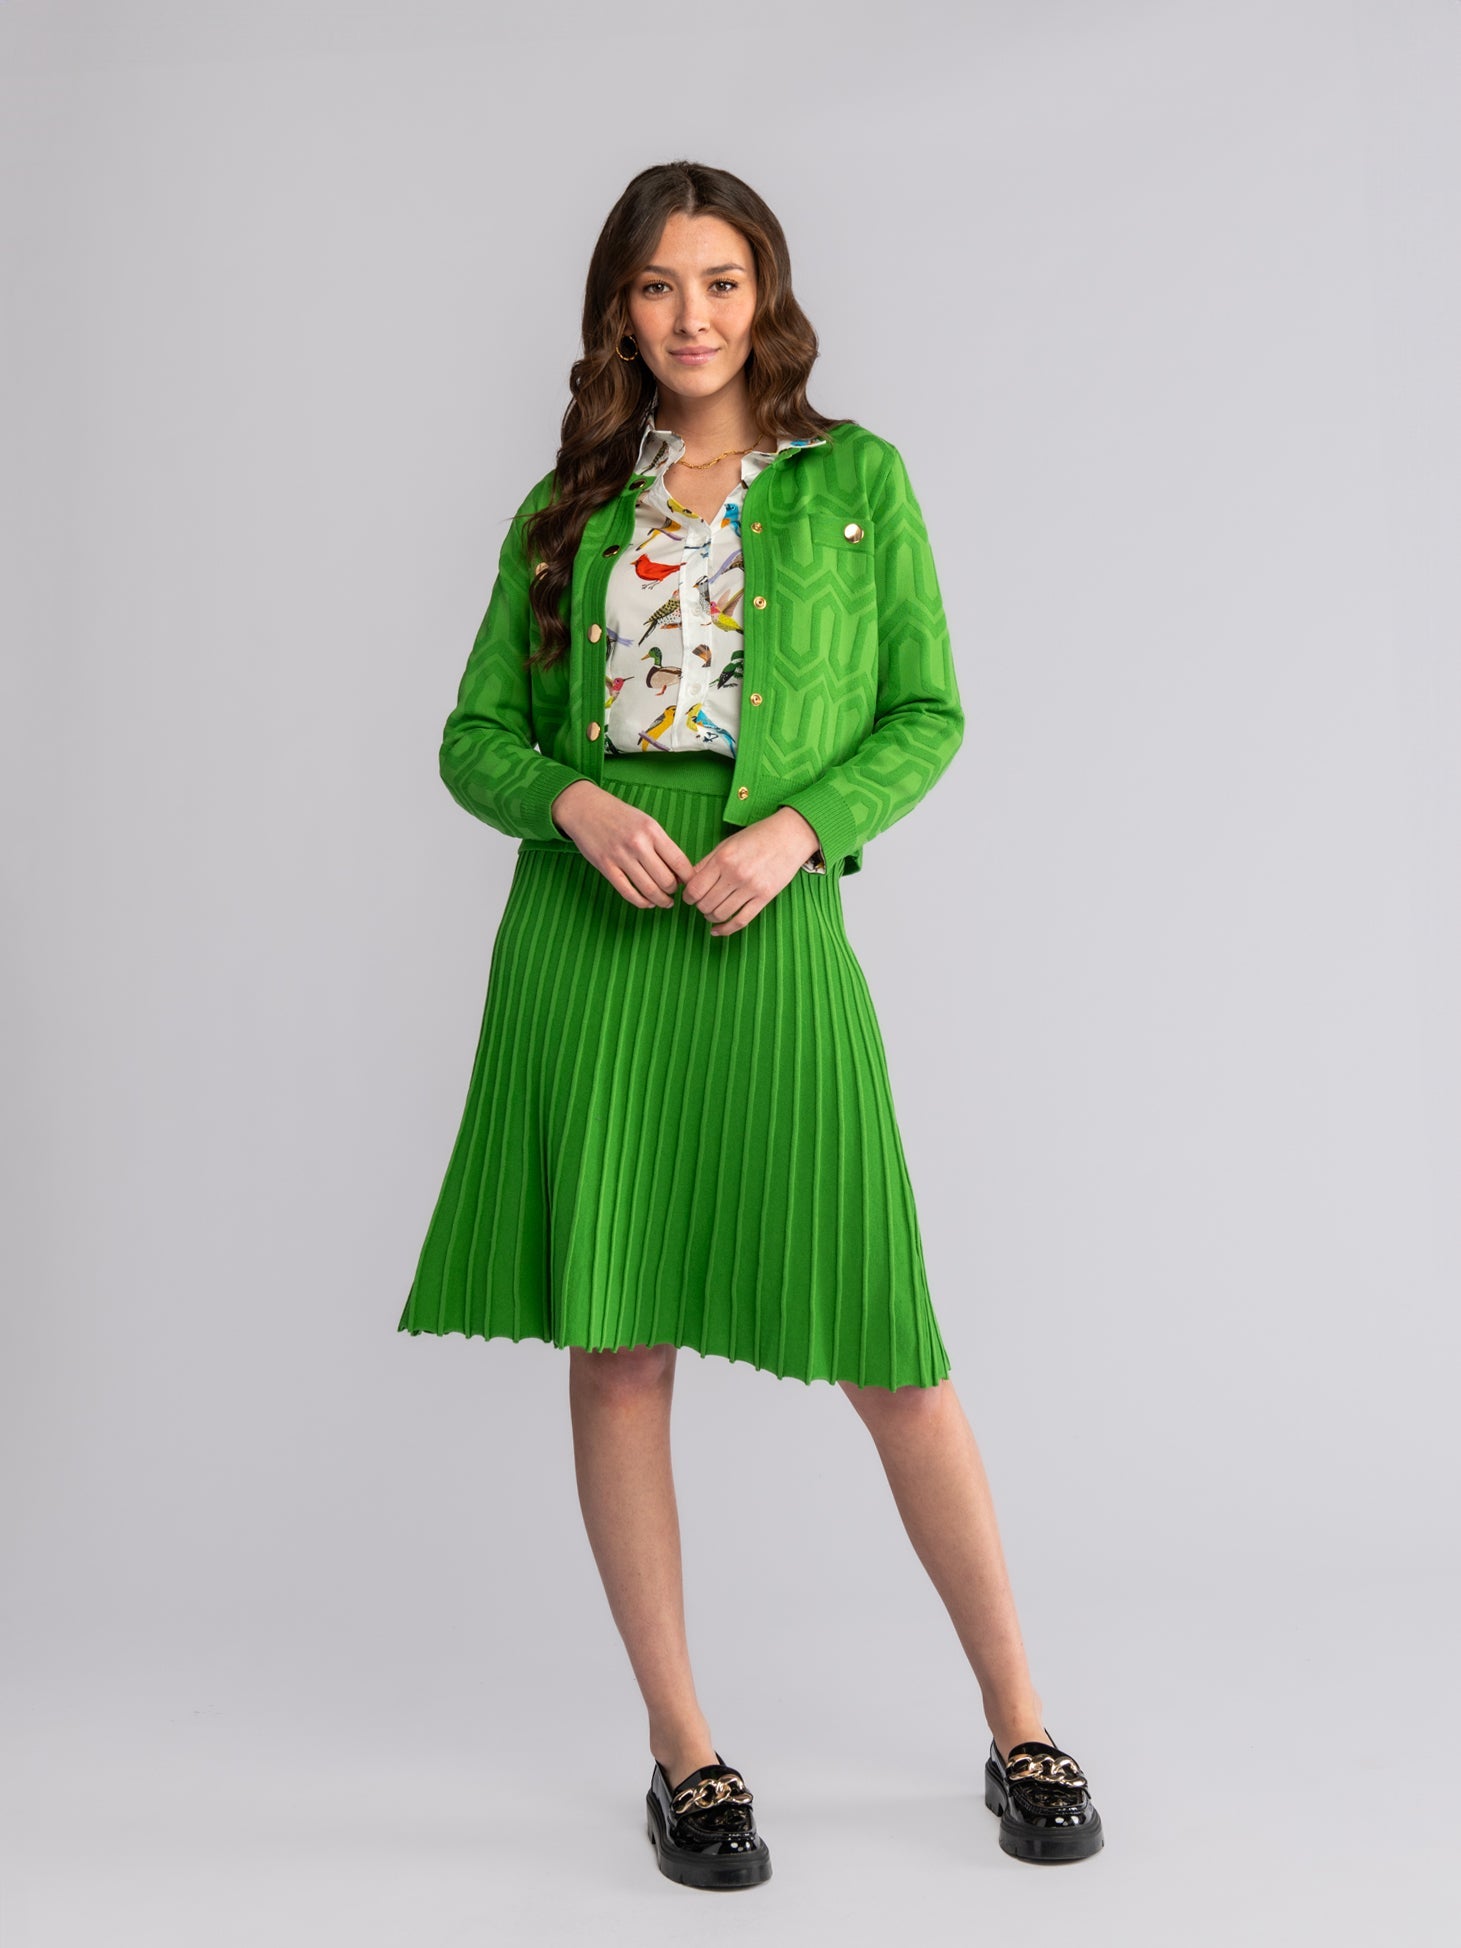 LEA cardigan Green - Lesley Evers-cardigan-Shop-Shop/All Products